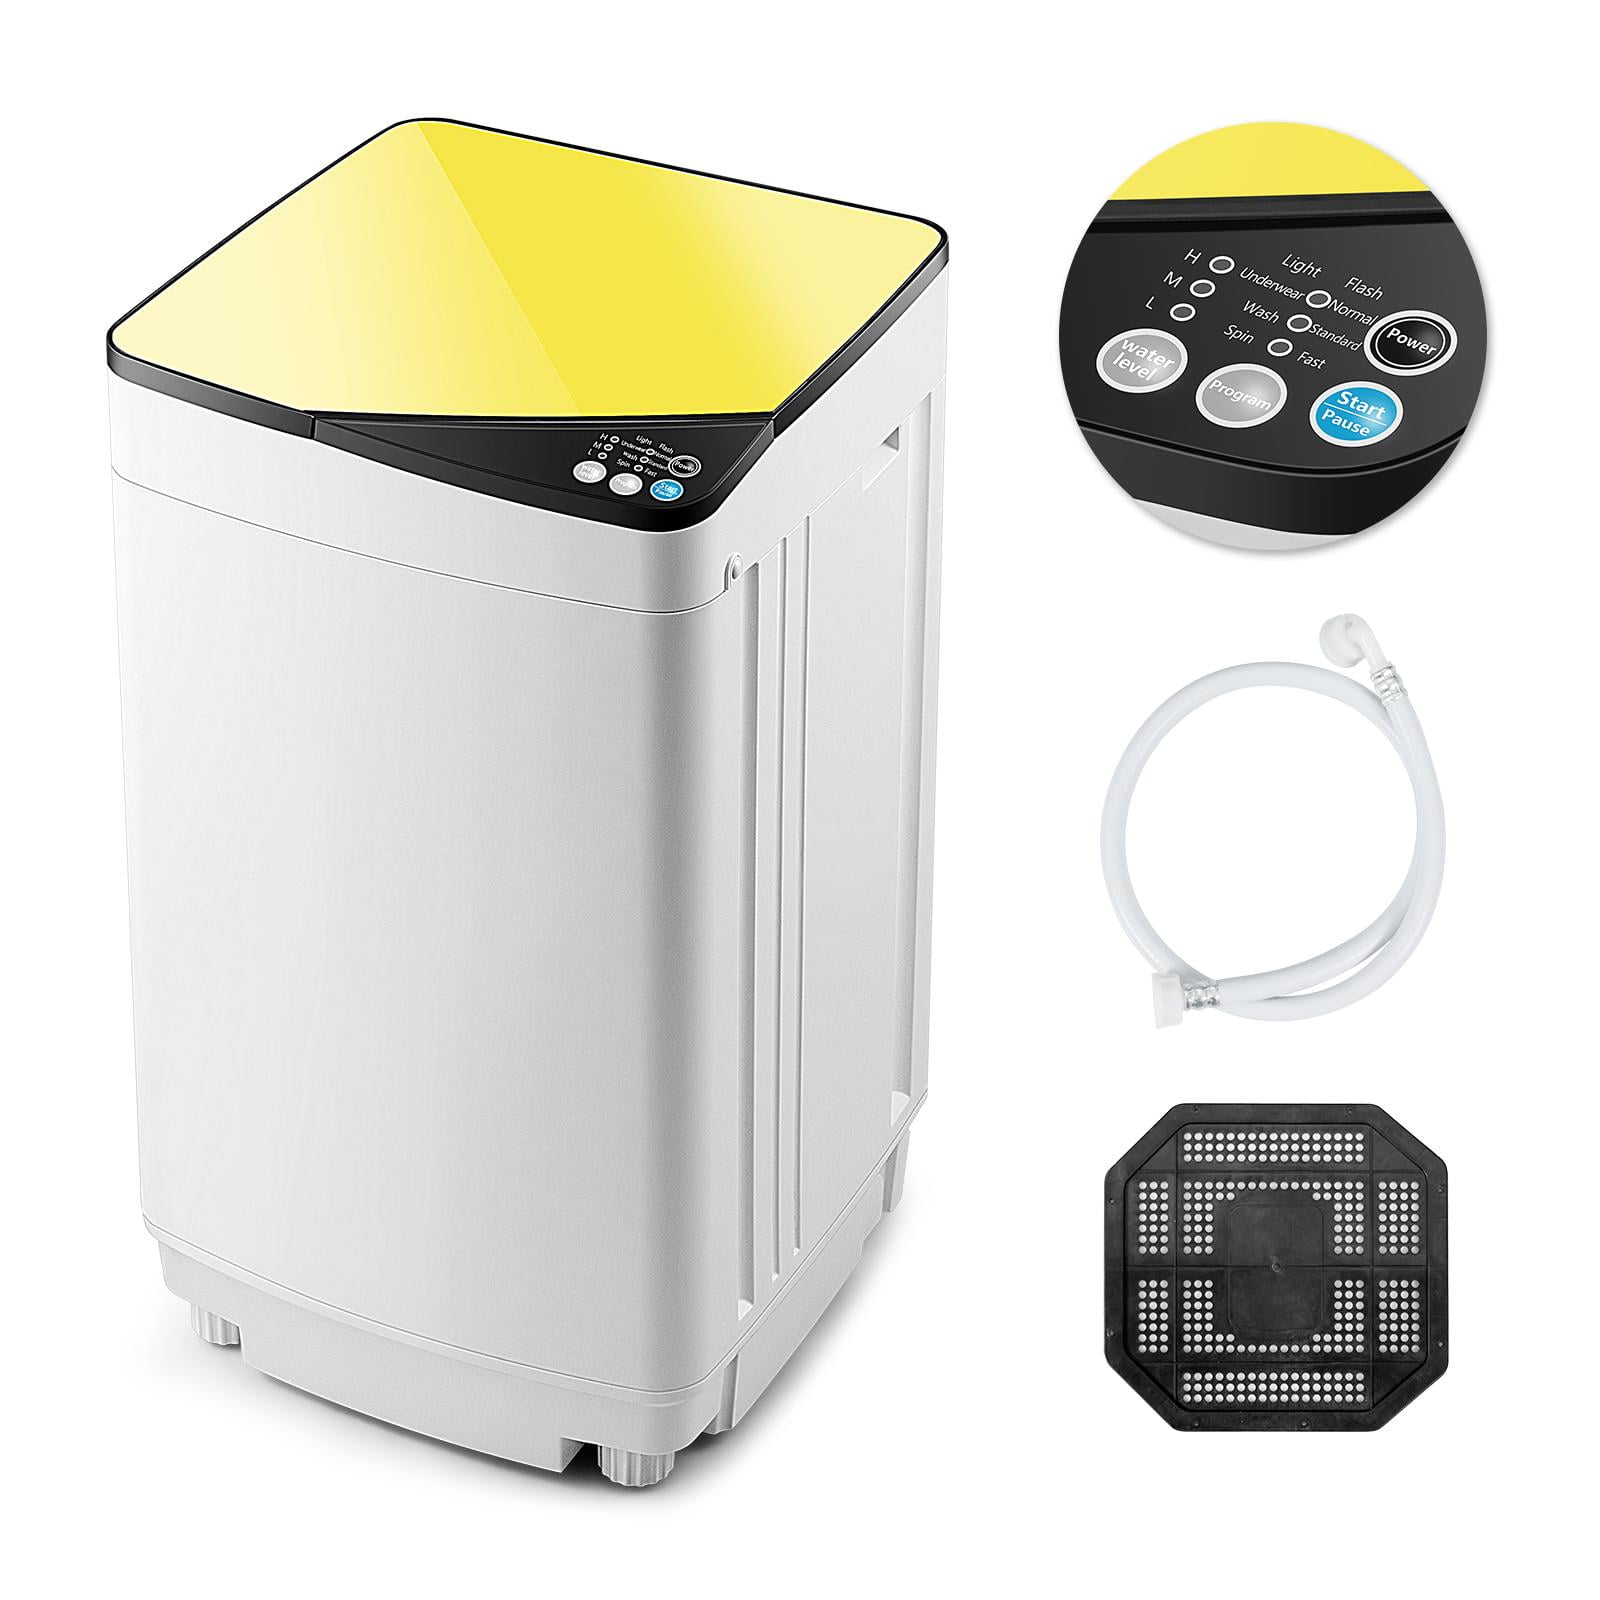 Space Saving 3.0 cu. ft. Top Load Washer & 3.6 cu. ft. 120 Volt Electric  Portable Compact Dryer